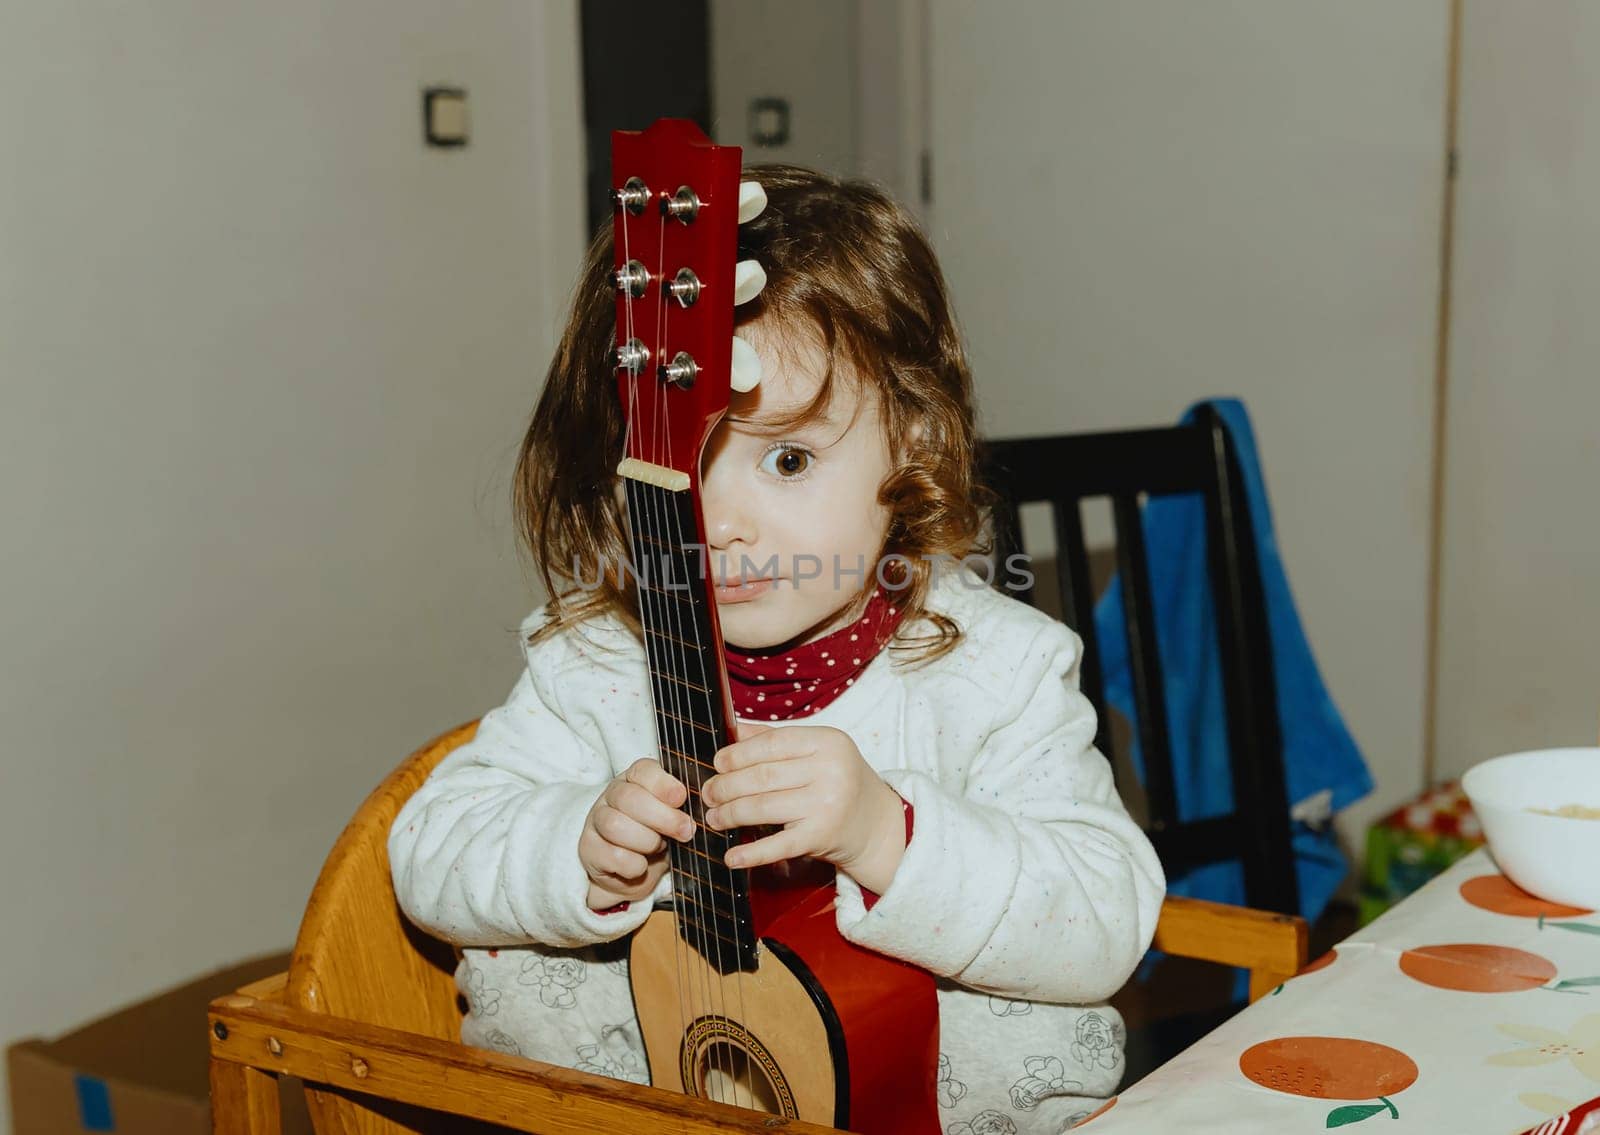 One beautiful Caucasian baby girl holds a guitar with one eye closed, sitting on a wooden chair at the table in the kitchen, side view close-up.